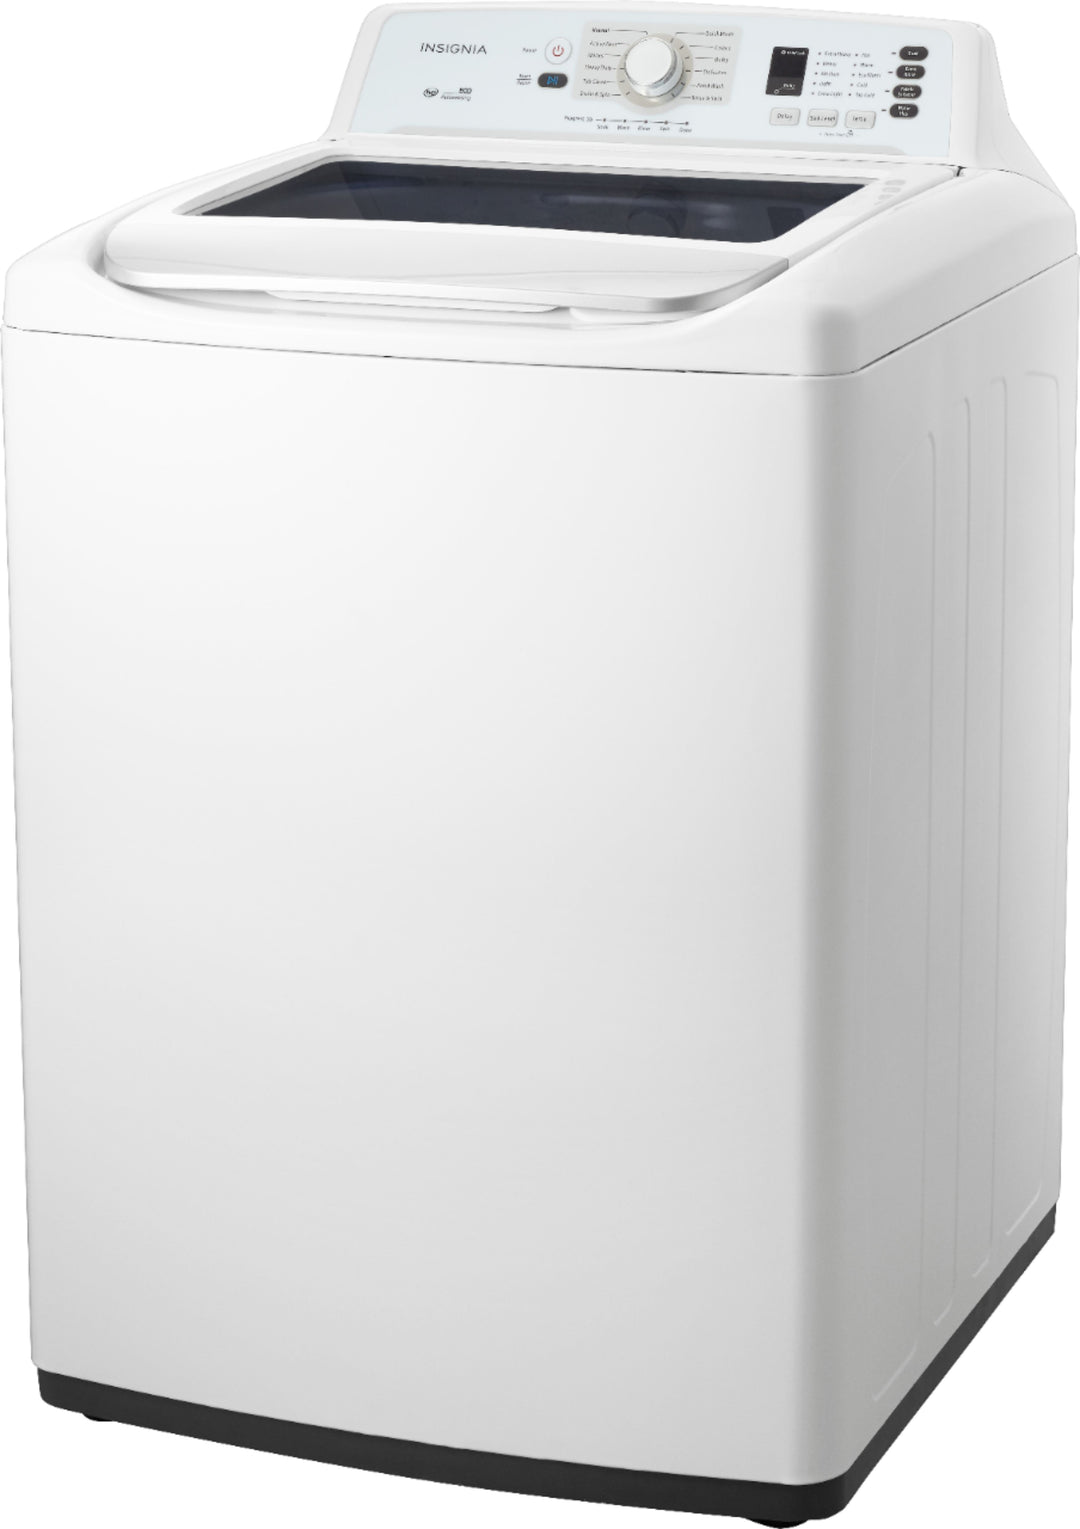 Insignia™ - 4.1 Cu. Ft. High Efficiency Top Load Washer - White_2